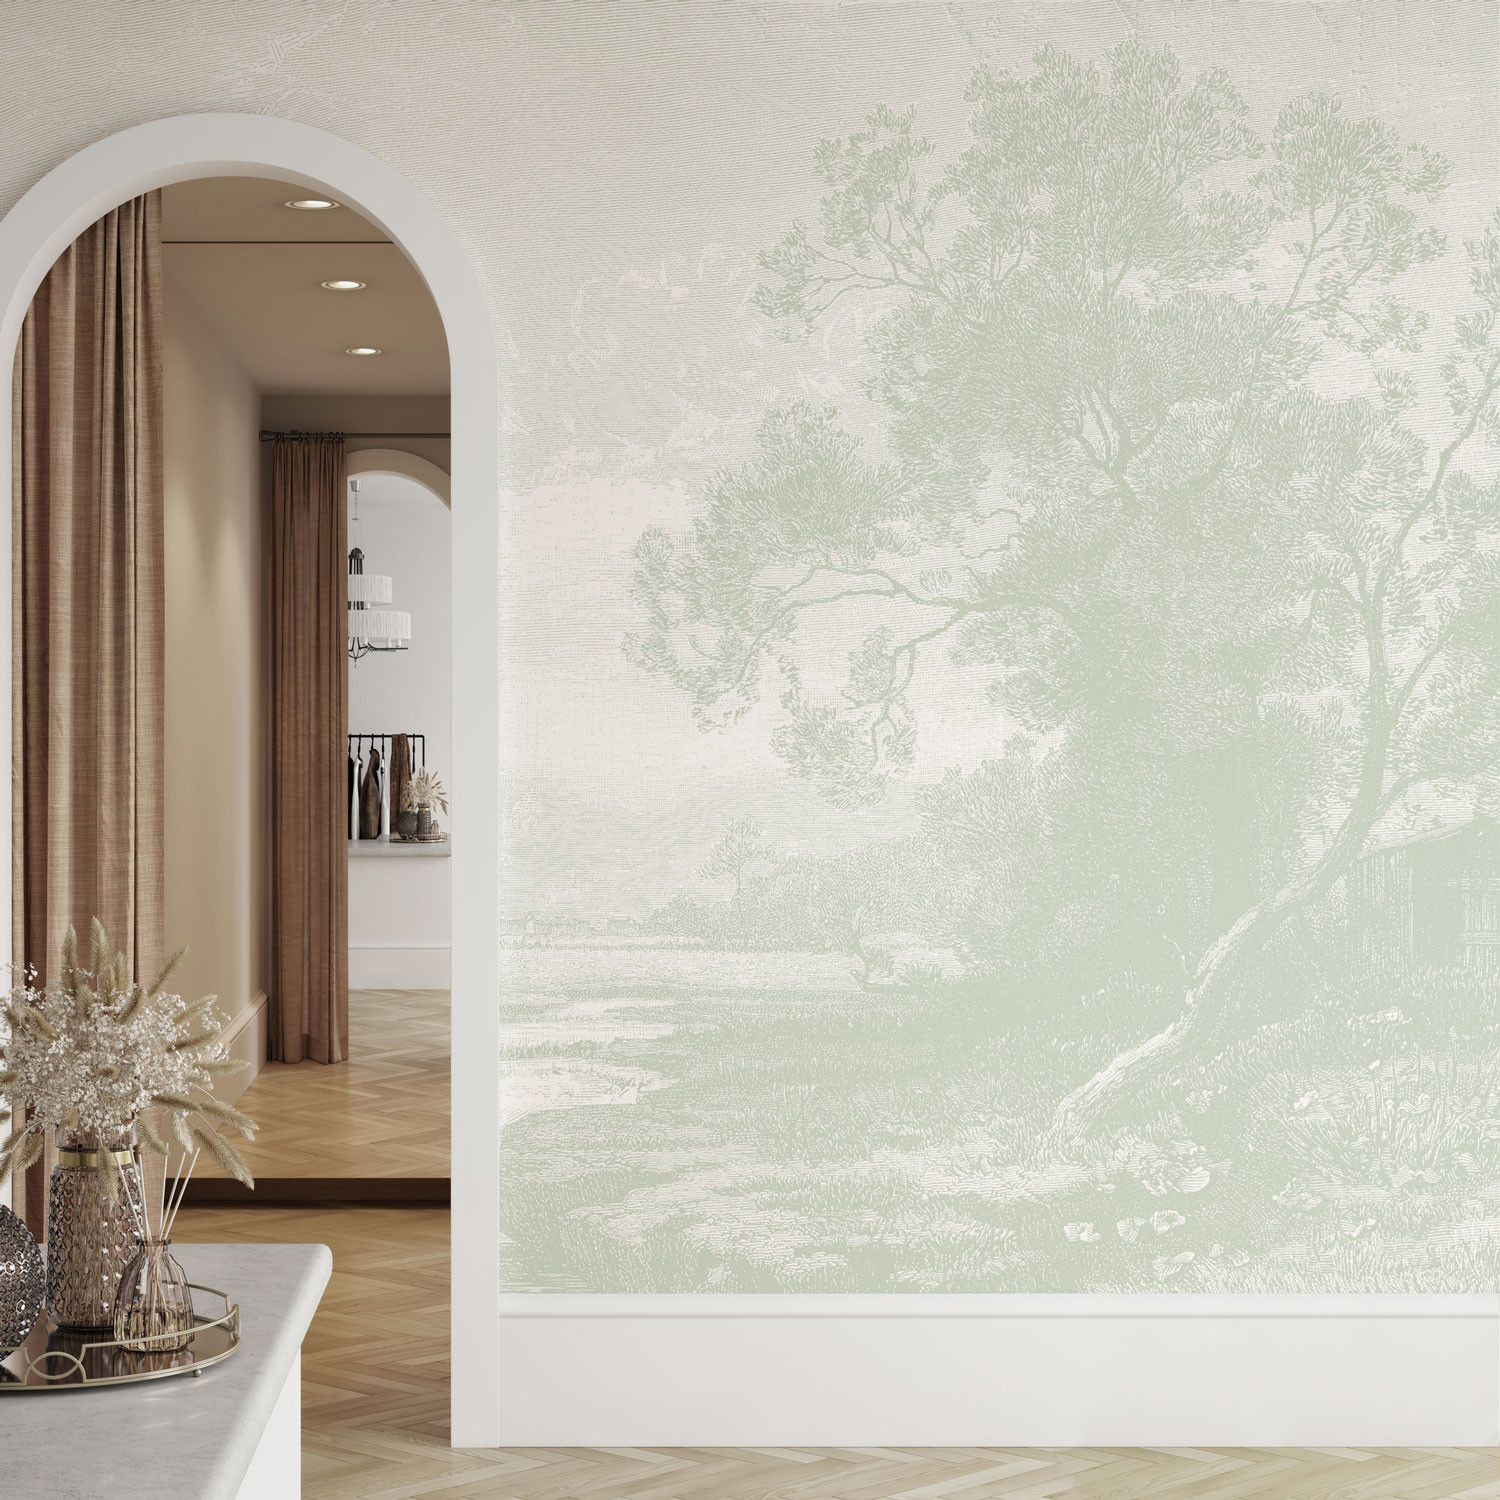 Tranquil Valley - Sage Green | WALLPAPER - Grafico Group